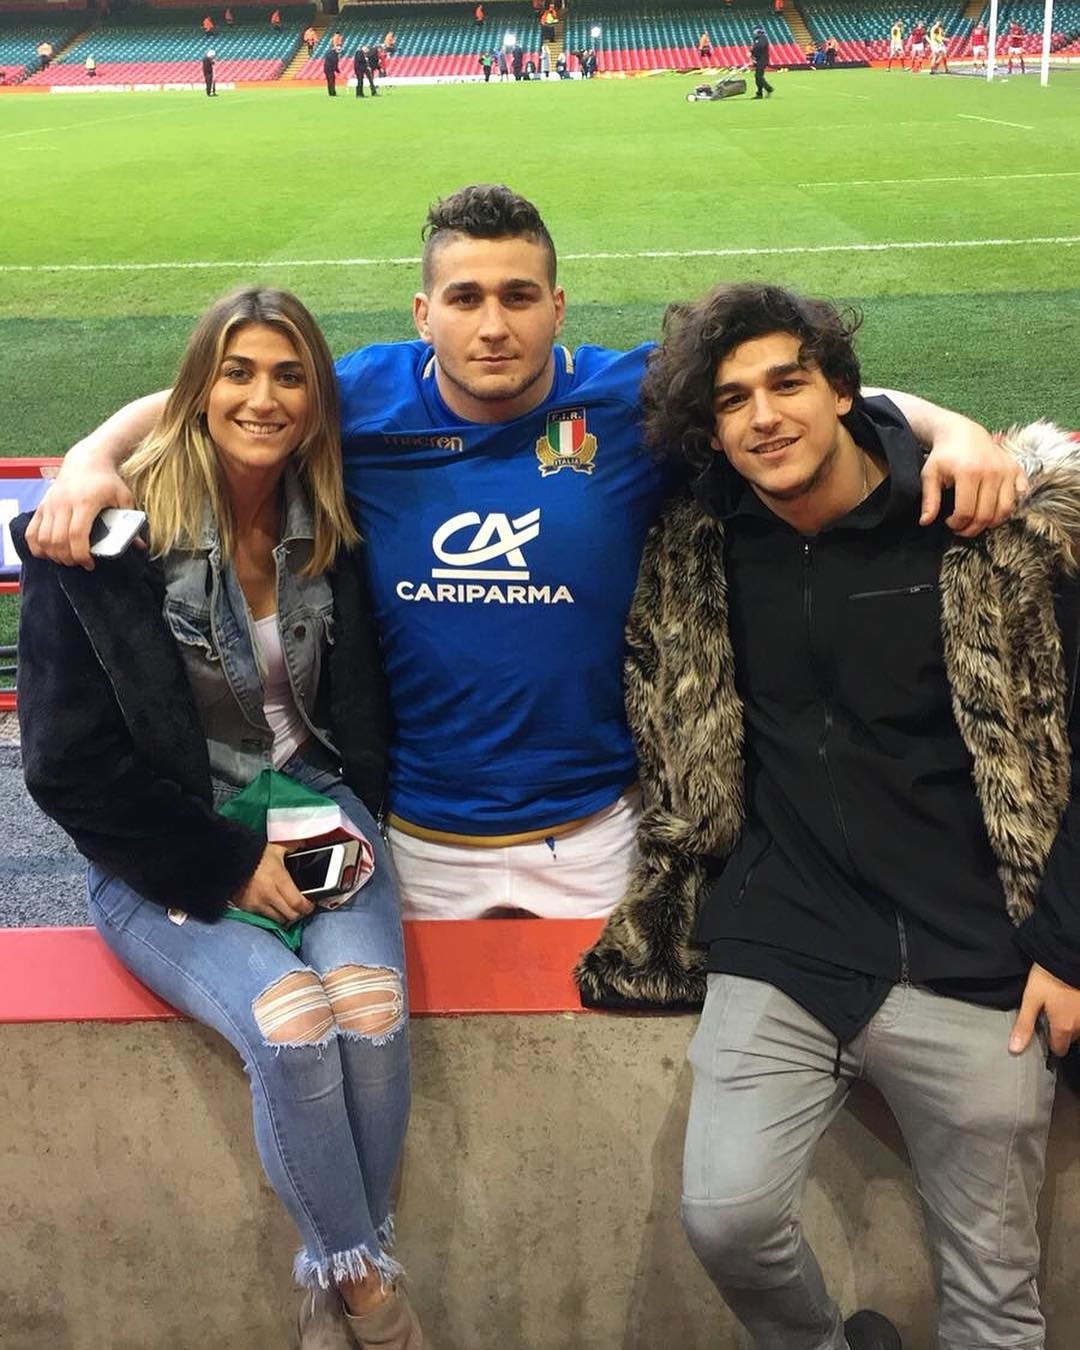 Meet Carolina Pasquali, Dillian Whyte's sport-mad girlfriend and Tiziano's star for Italy's rugby team